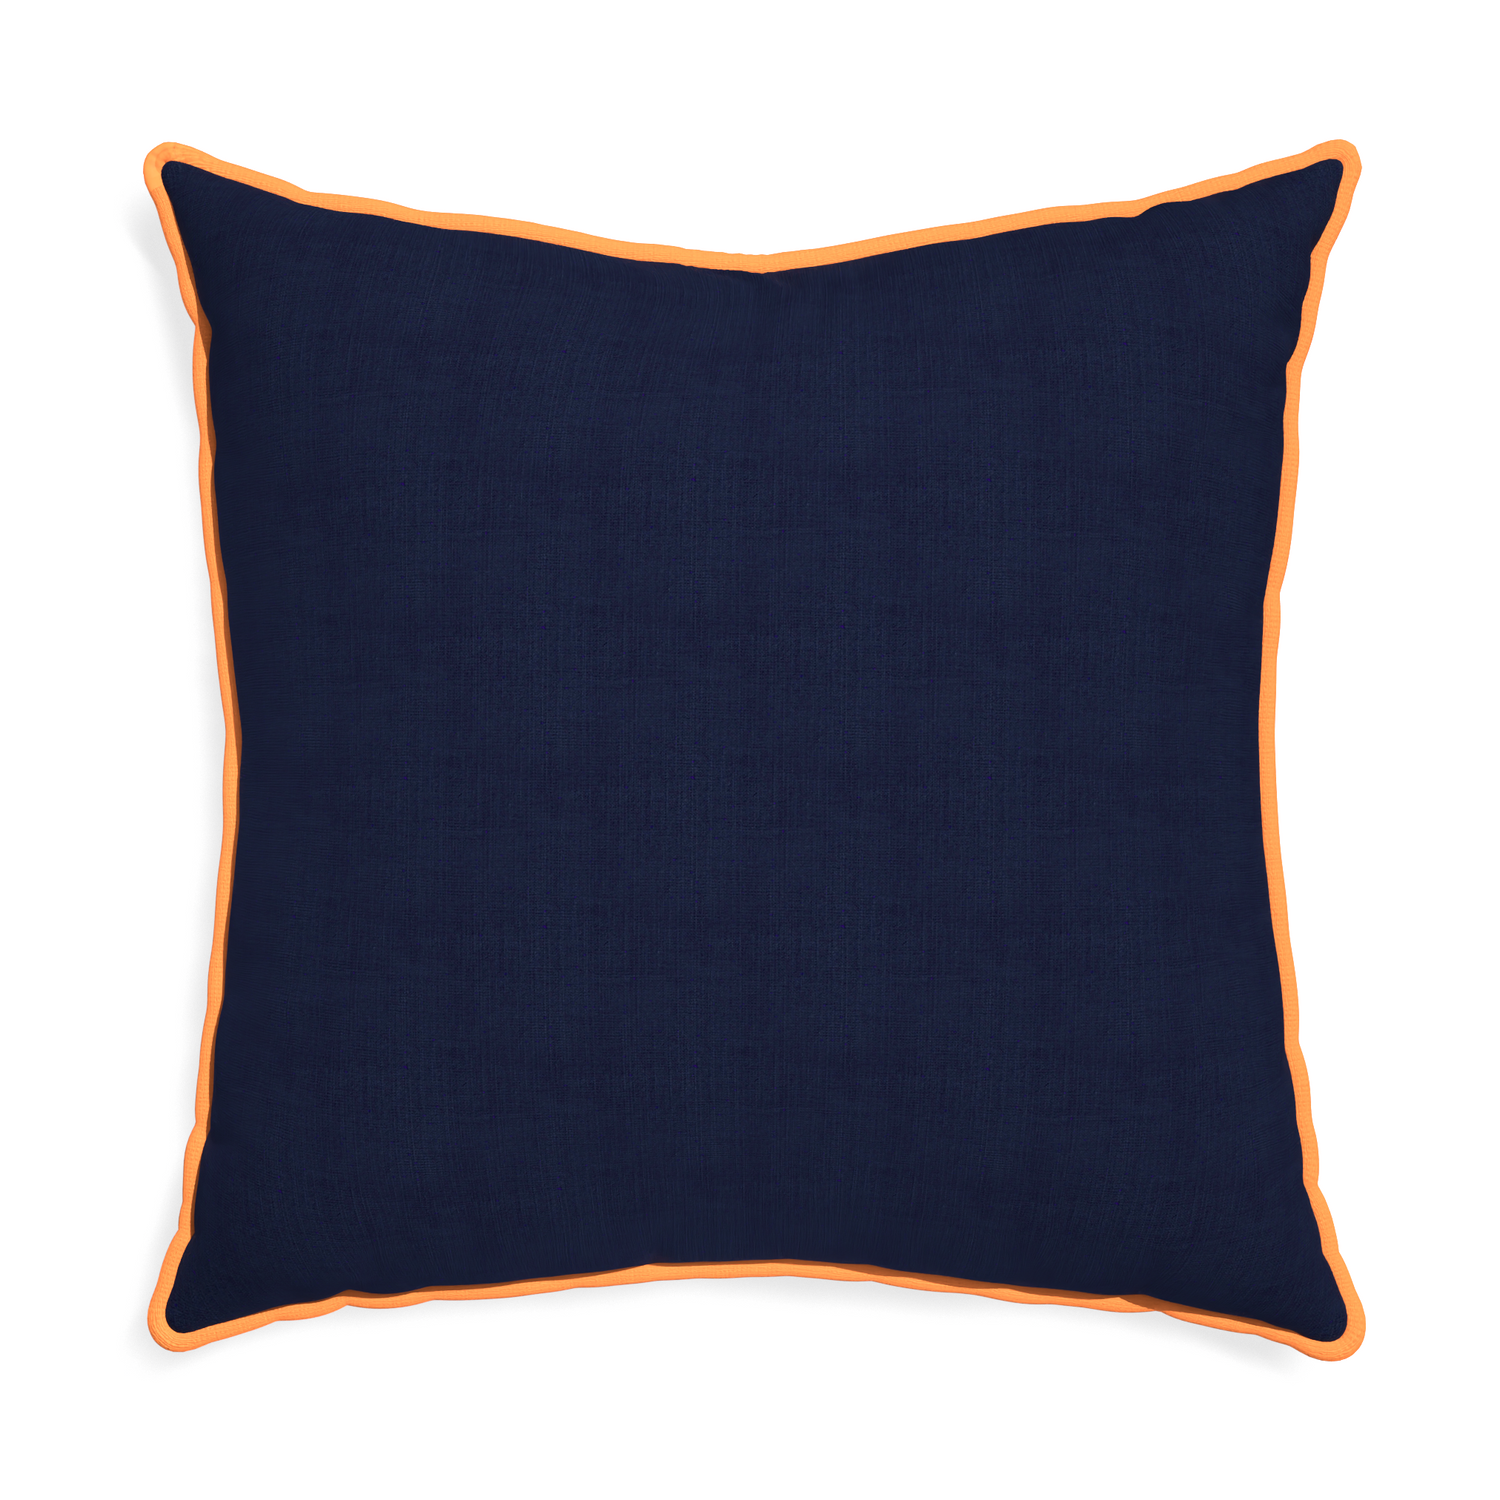 Euro-sham midnight custom navy bluepillow with clementine piping on white background